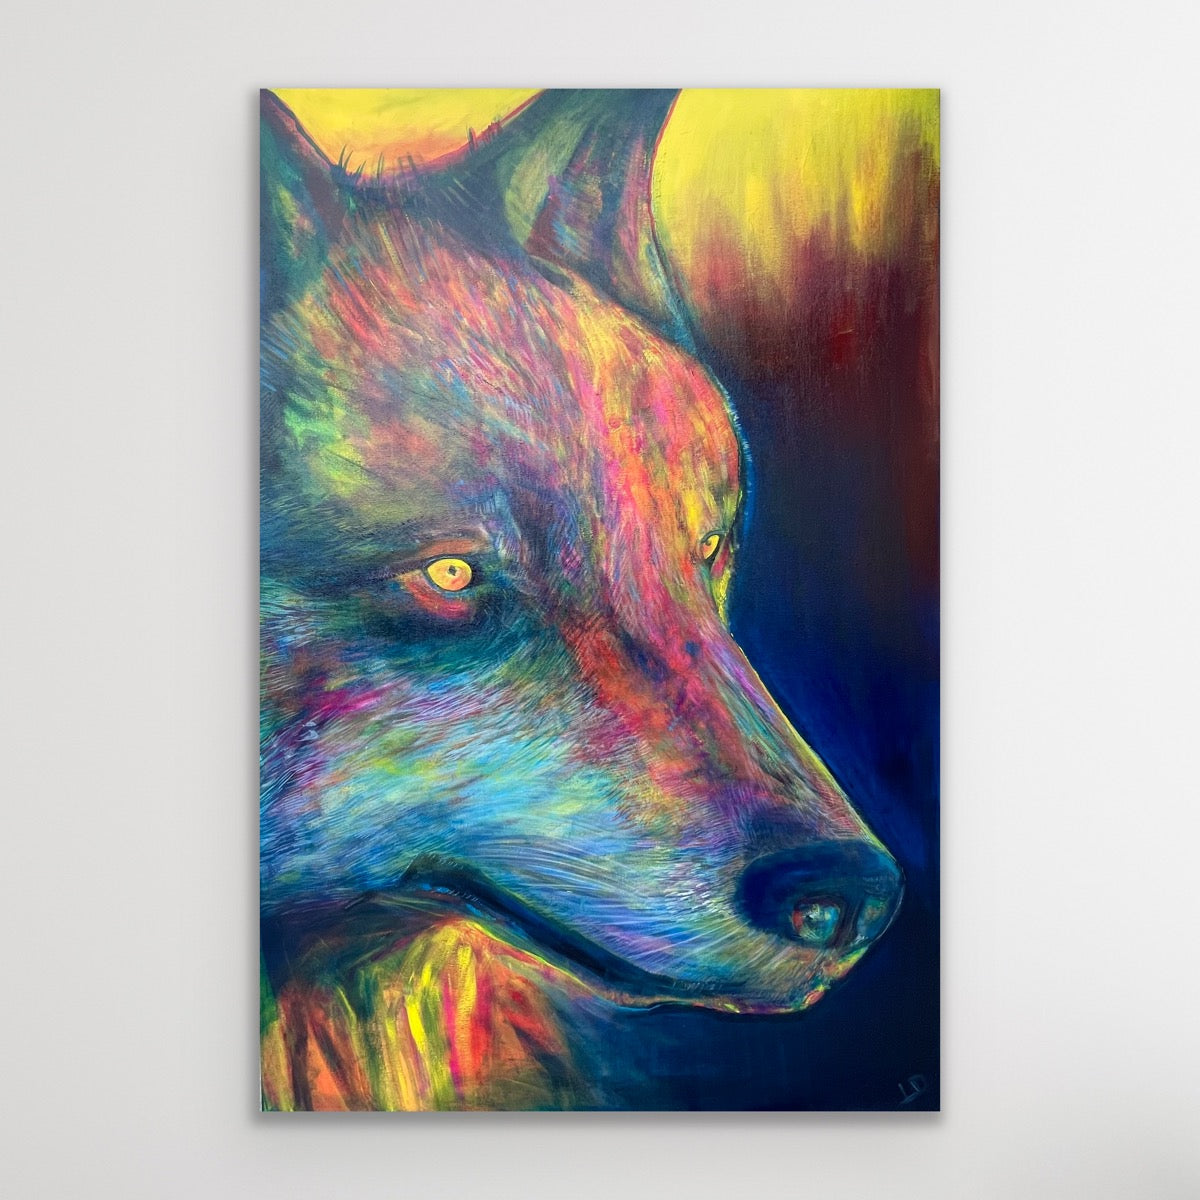 Eyes of the Forest - Gallery Wrapped canvas print